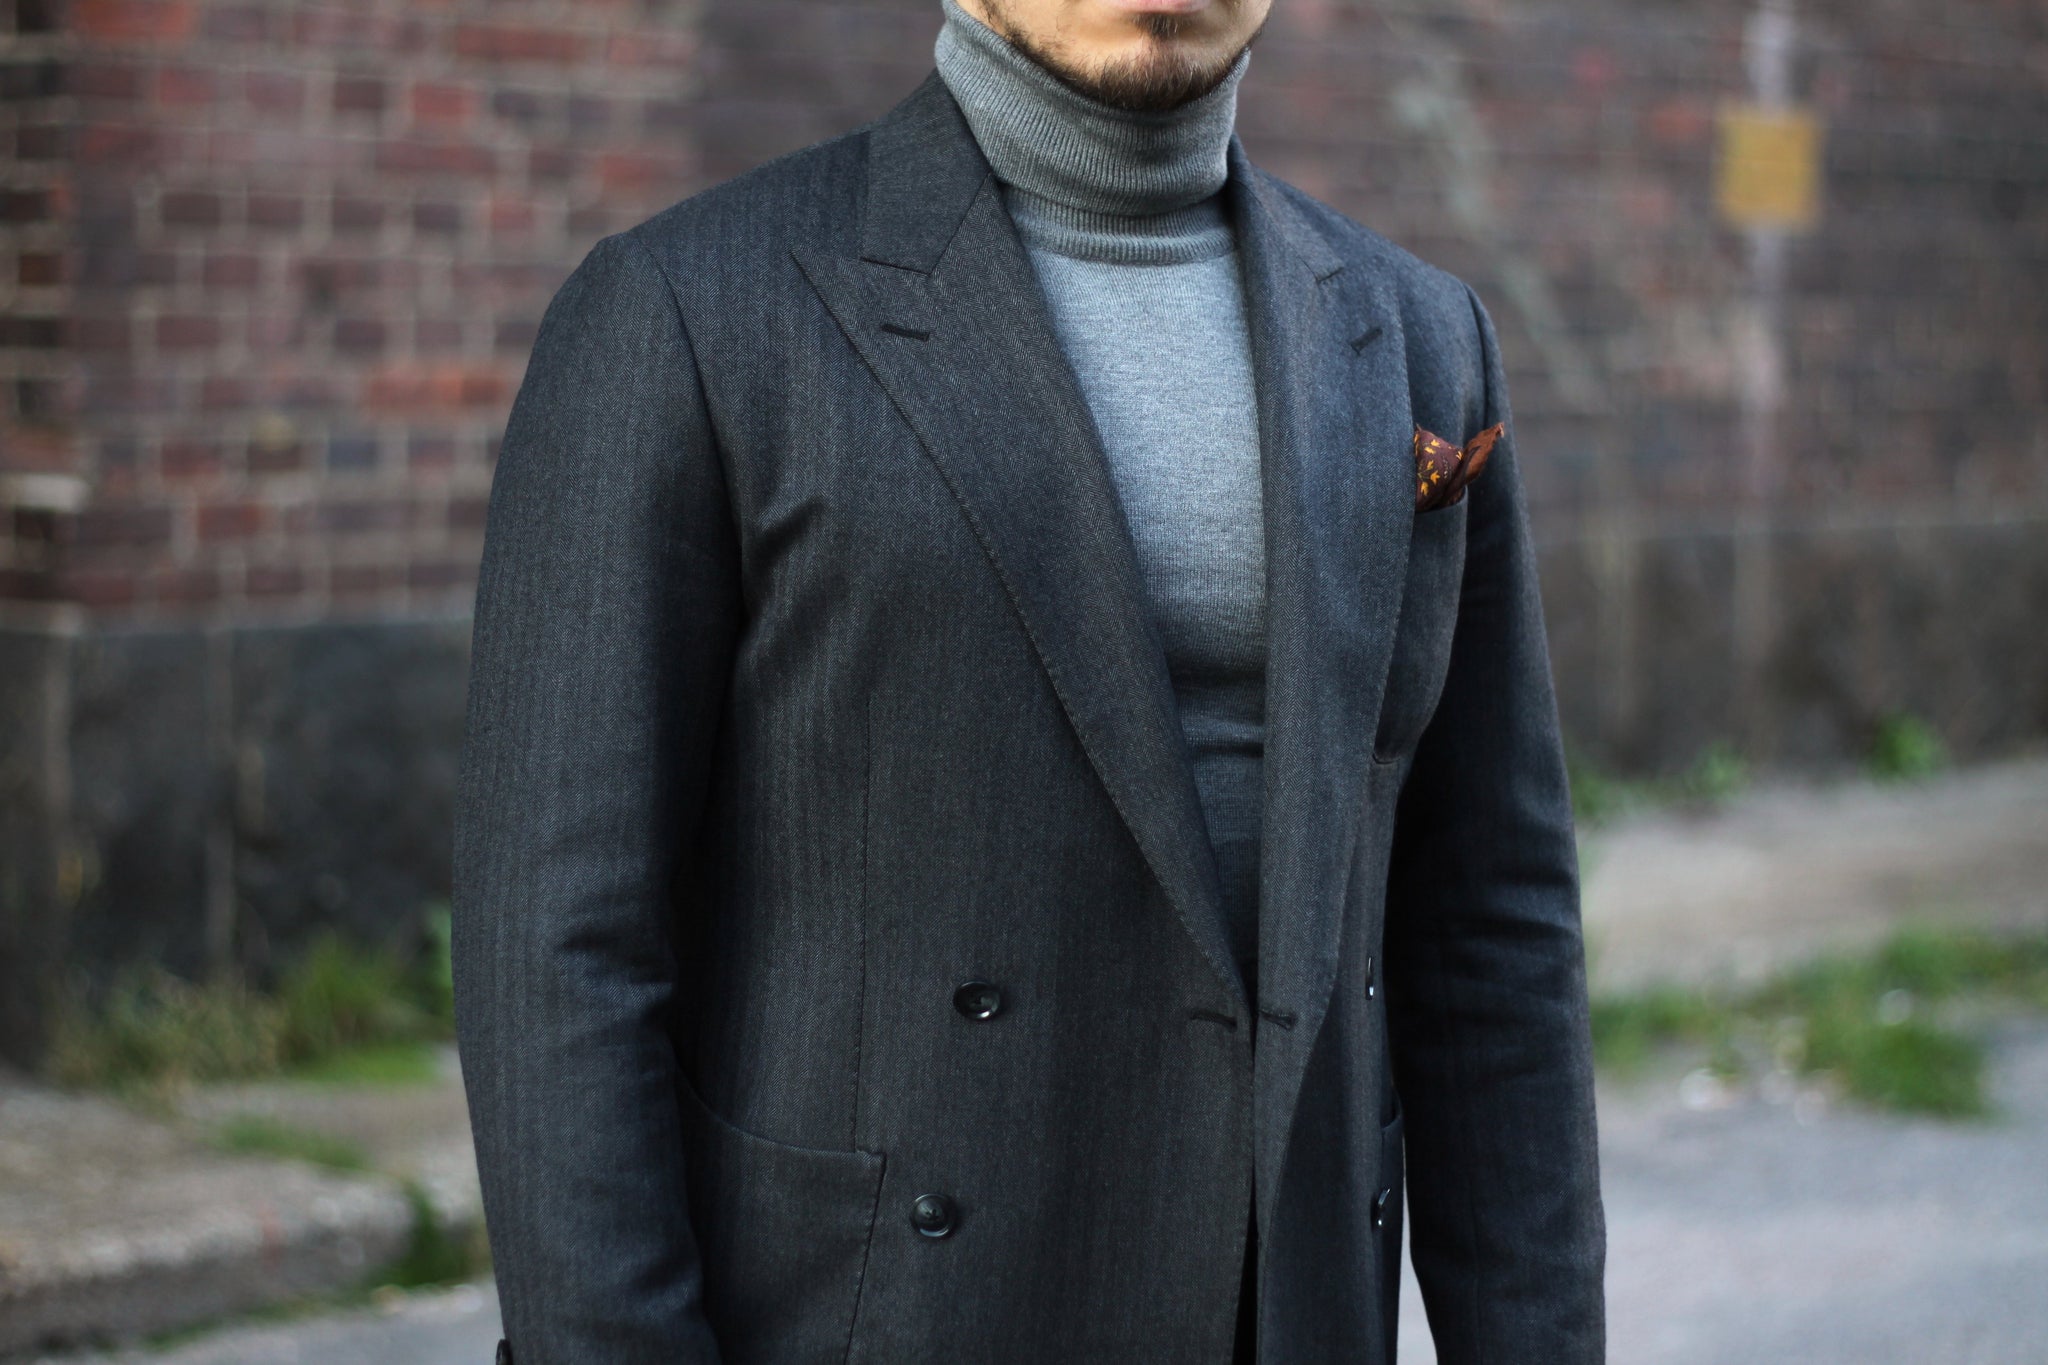 Gray double-breasted suit - versatile choice for fall part II